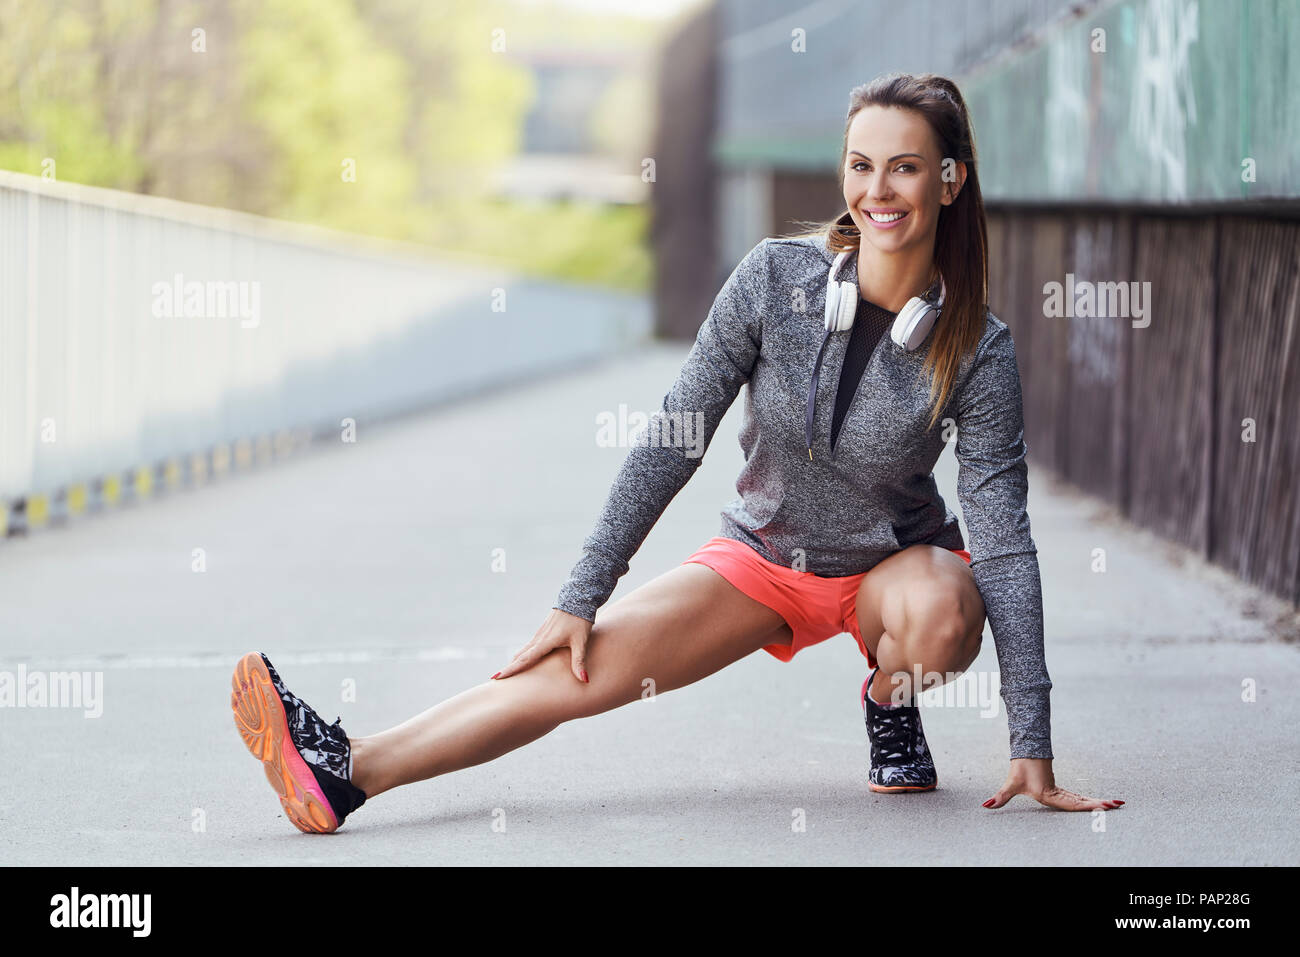 Female runner stretching legs during urban workout Stock Photo